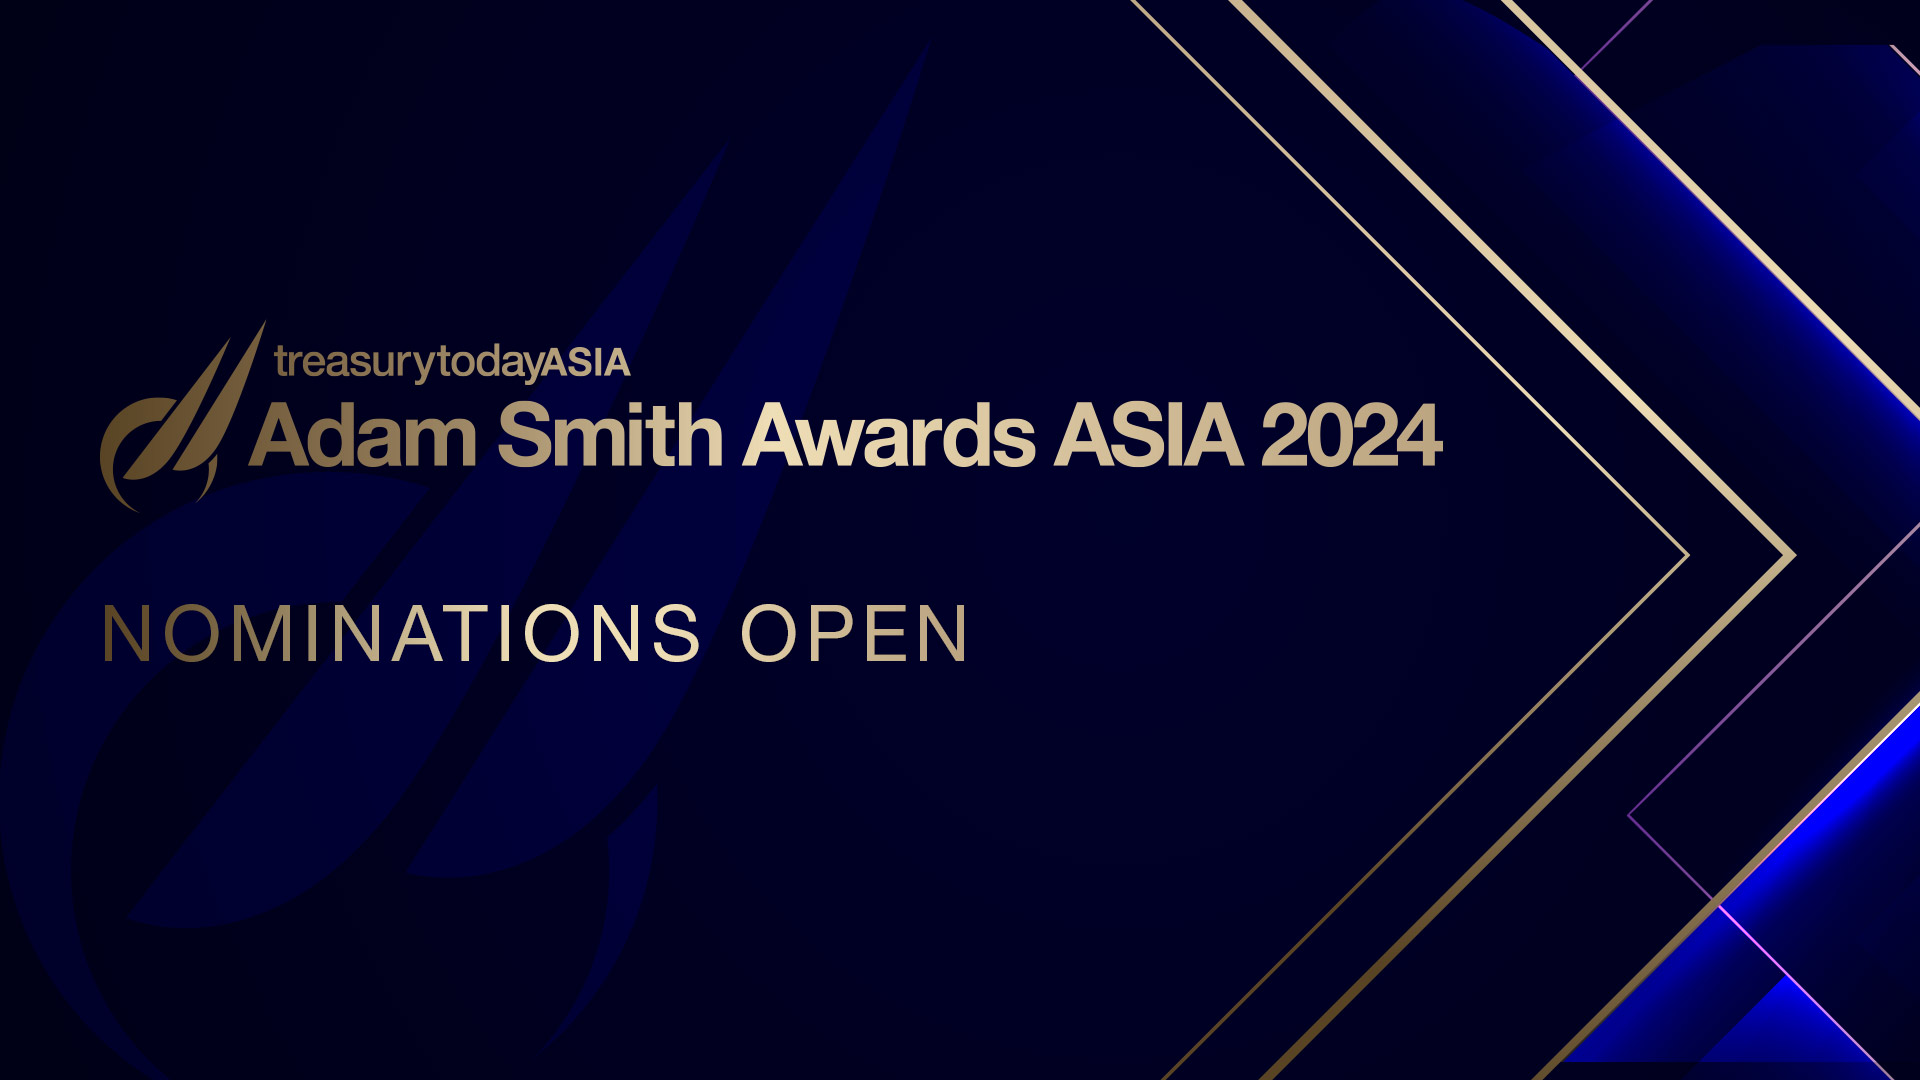 Adam Smith Awards Asia 2024 nominations now open